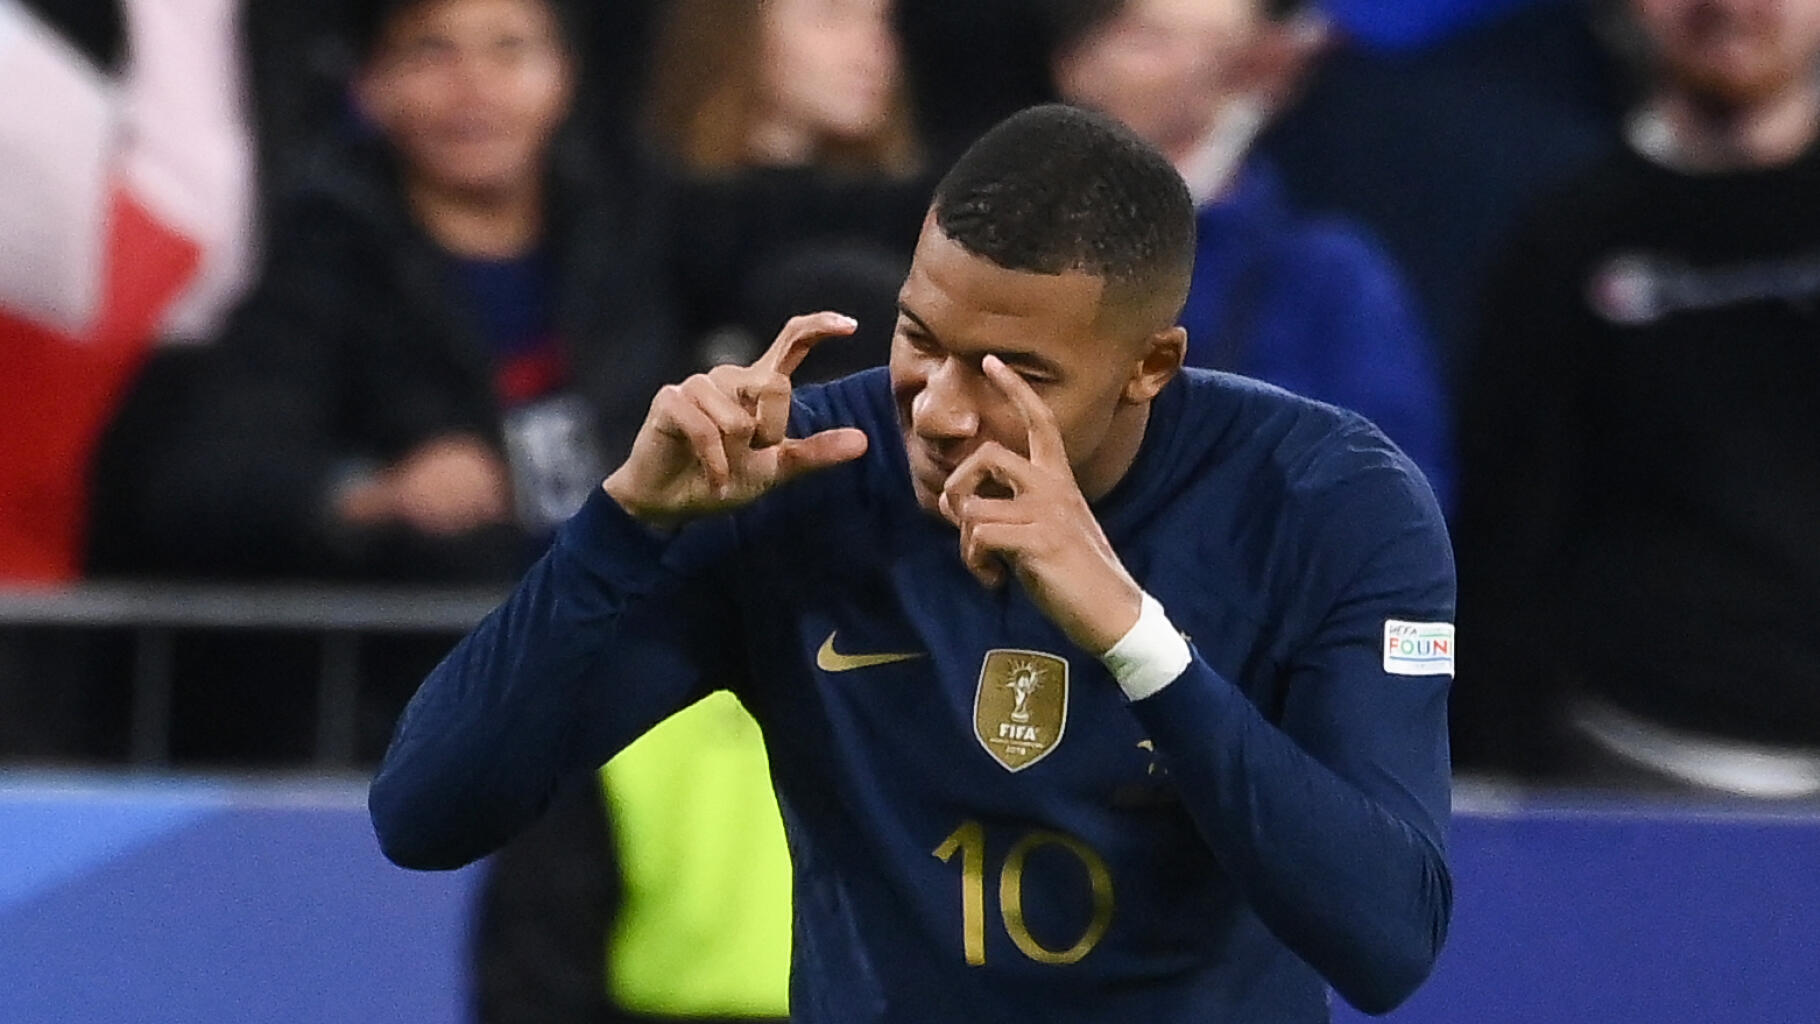 Kylian Mbappé defends his action for image rights - Archyde